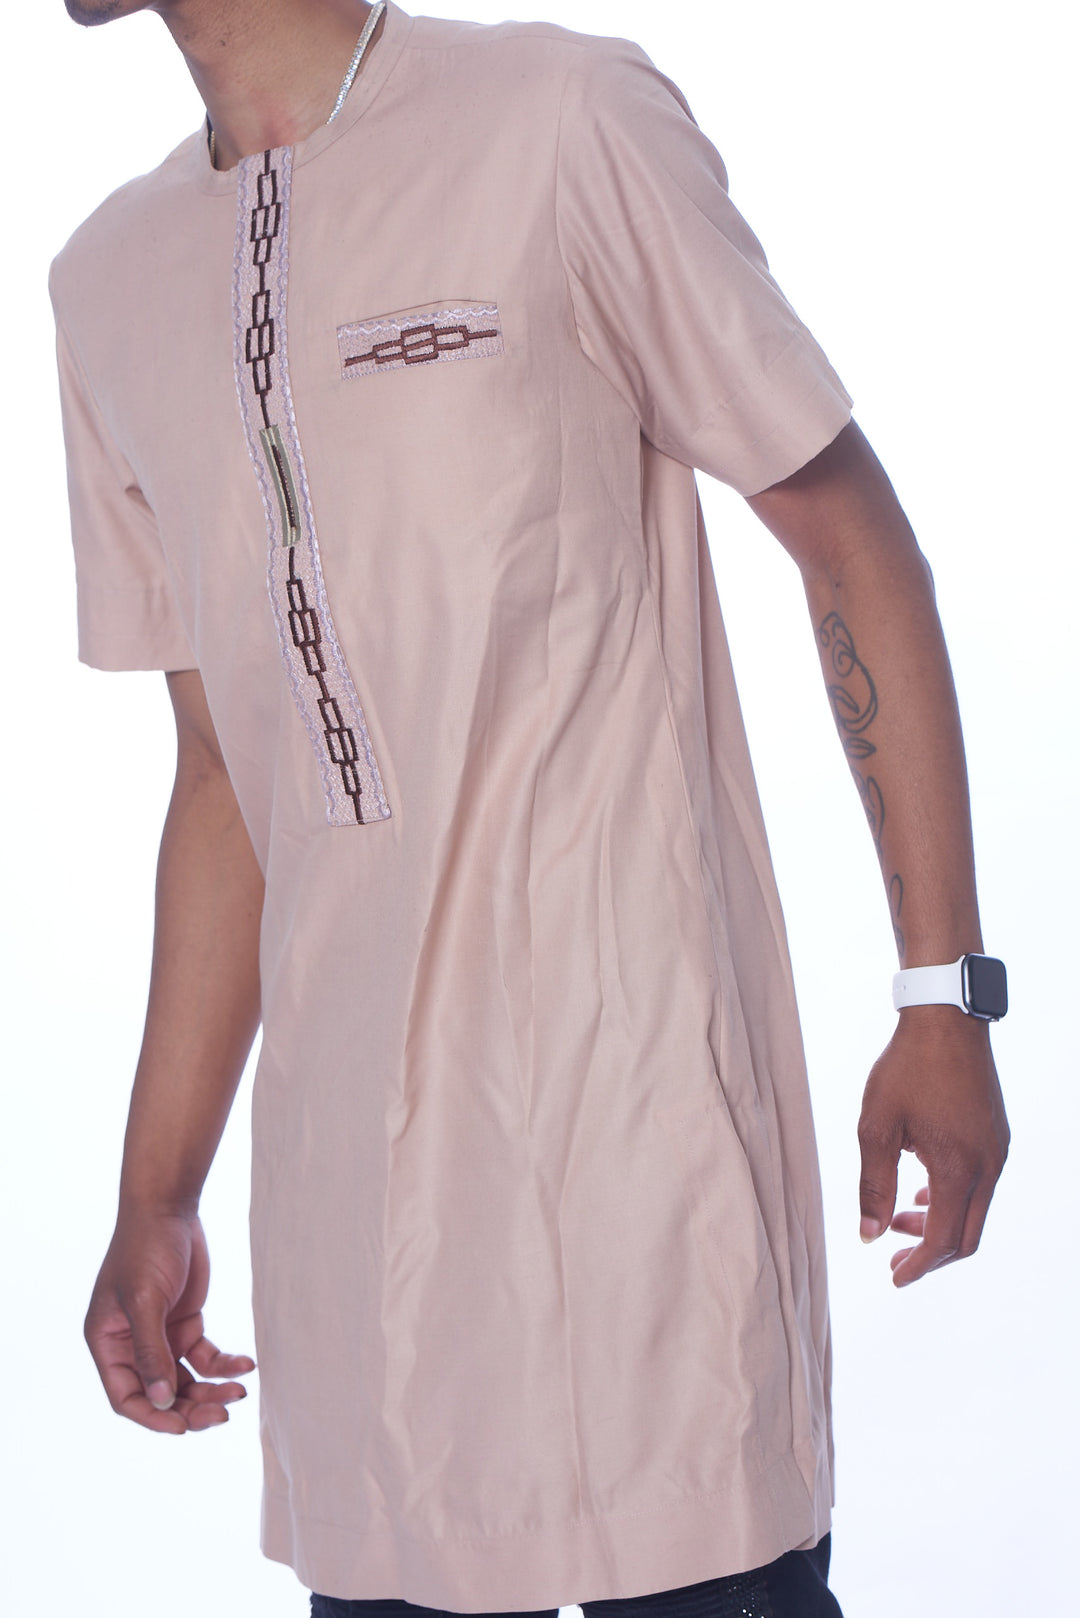 Photo of a man wearing myObioma's Nafrican Kaftan, which is a neutral and beige T-shirt that reaches below the waistline. It includes a crewneck feature and a simple dark brown design pattern resembling a zipper down the chest. There is also a dark brown faux pocket on the upper side of the chest for a decorative effect. 